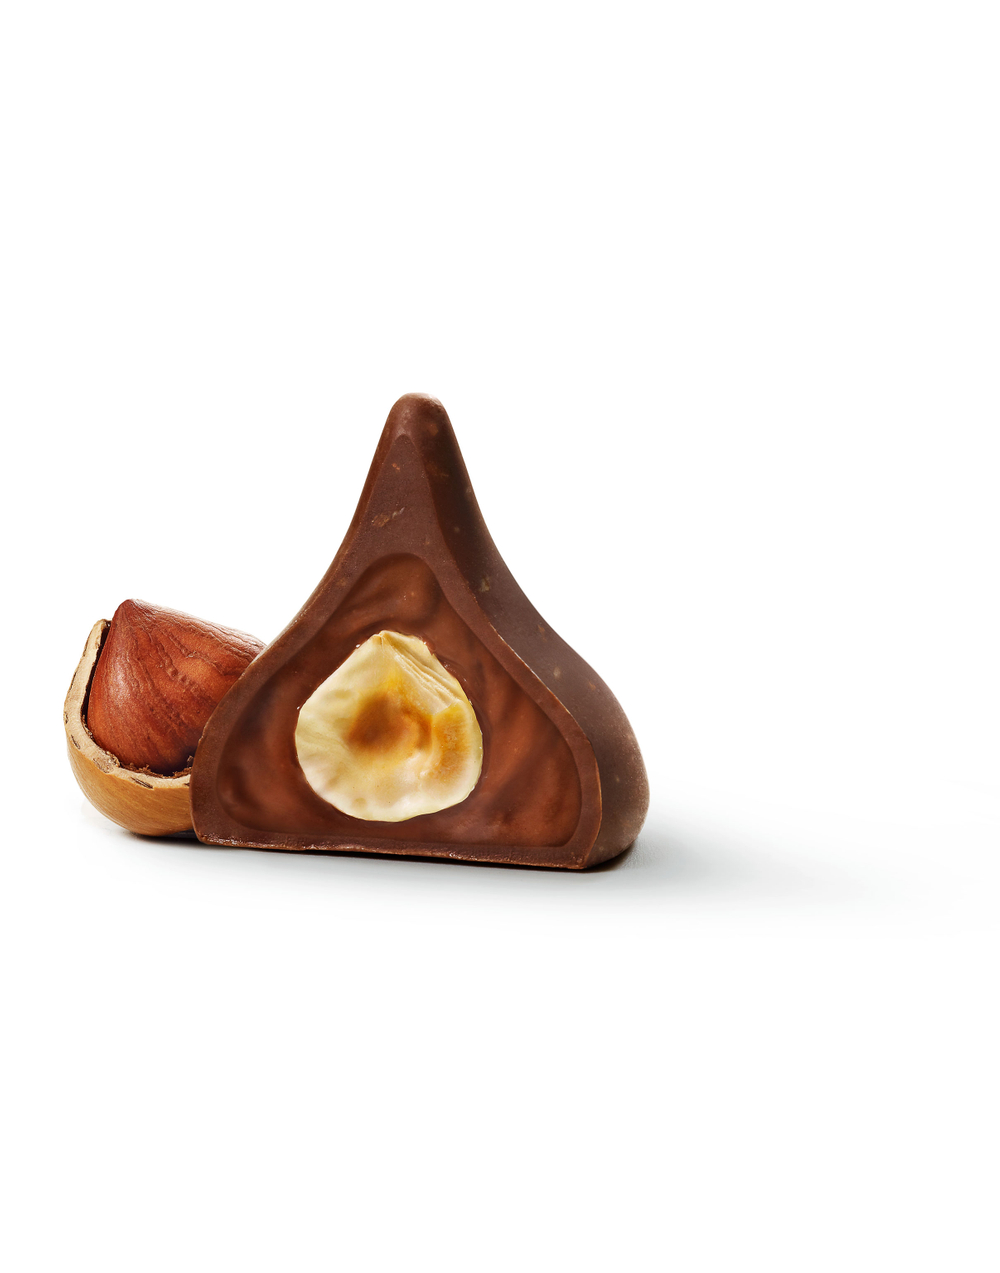 Hershey's Chocolate Kiss Advertising Campaign